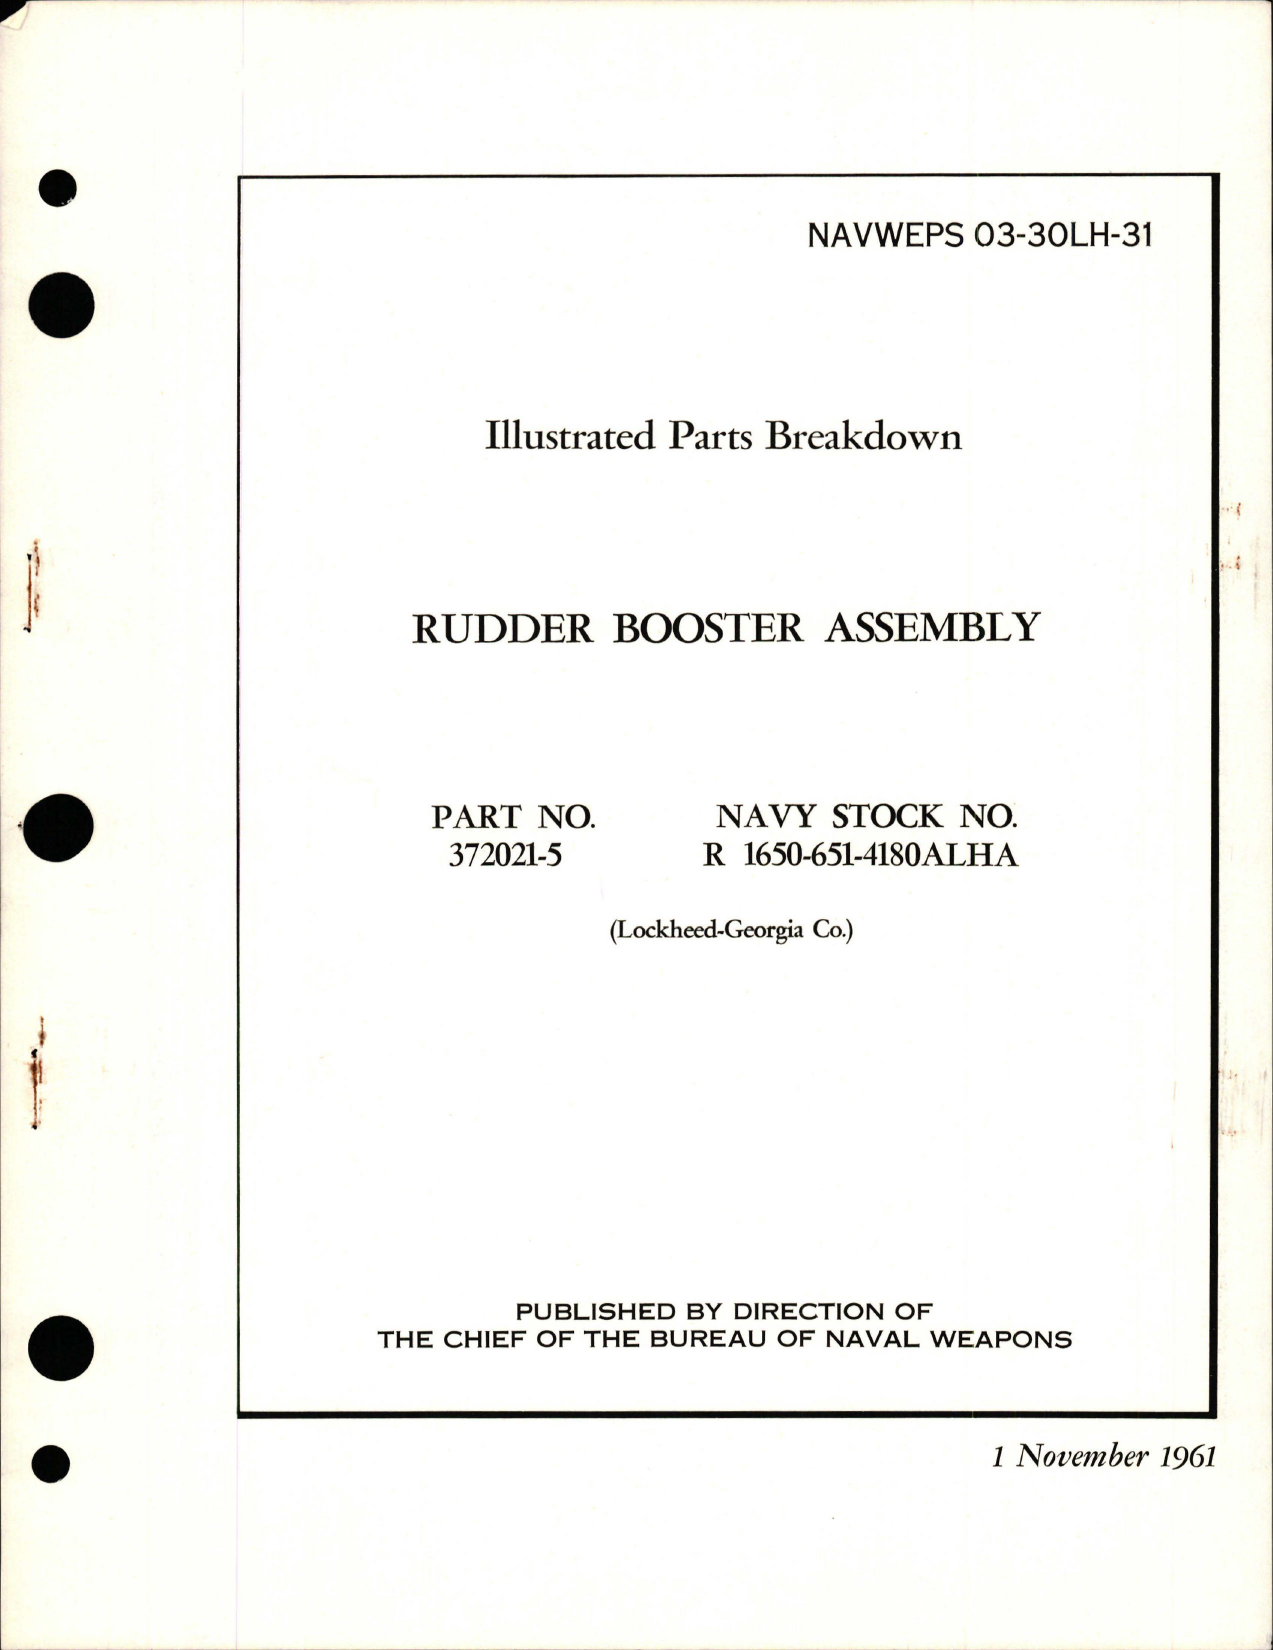 Sample page 1 from AirCorps Library document: Illustrated Parts Breakdown for Rudder Booster Assy - Part 372021-5 